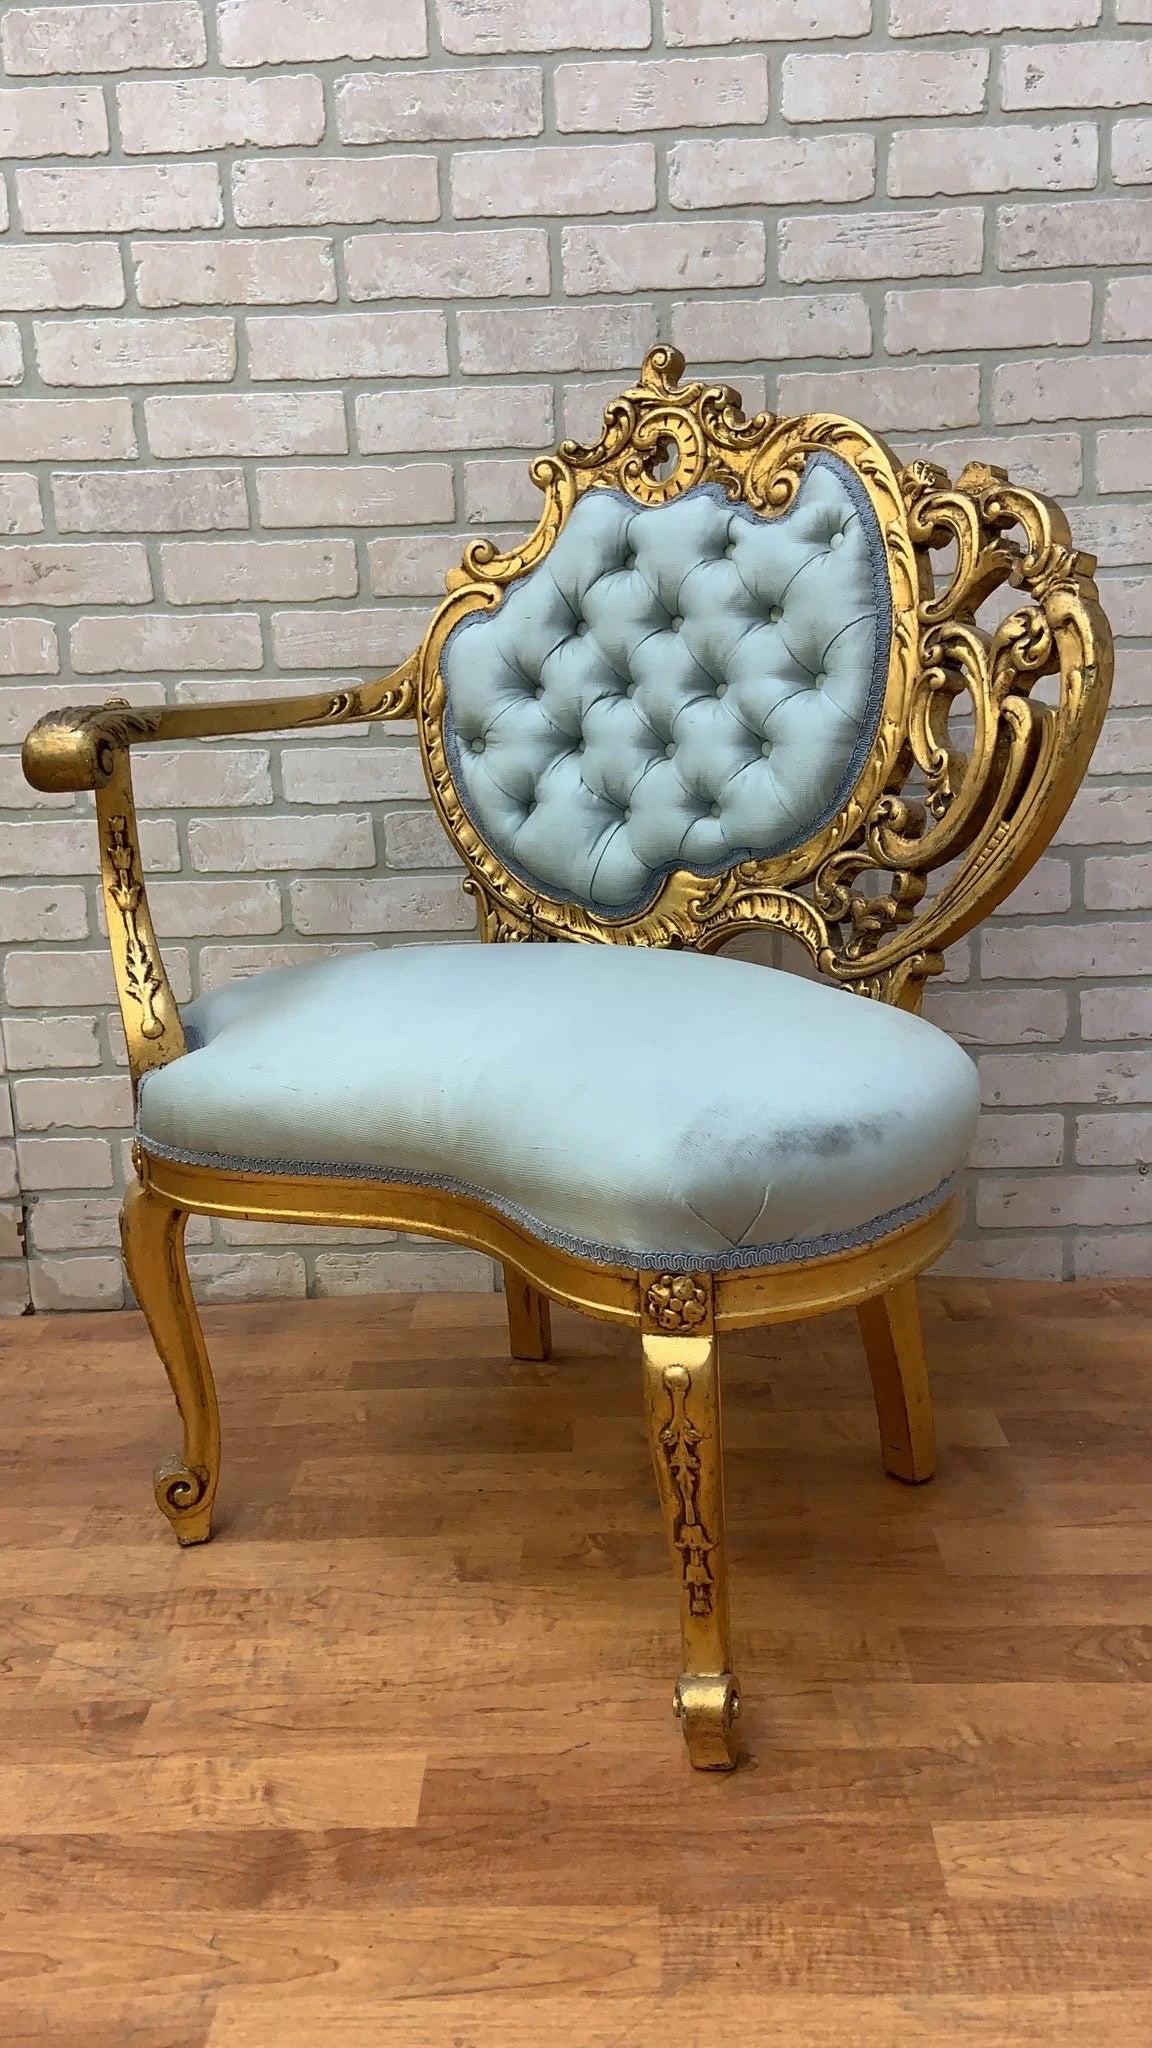 Vintage French Louis Style Carved Asymmetrical Gold-Gilded Baroque Revival Single Arm Accent Chair